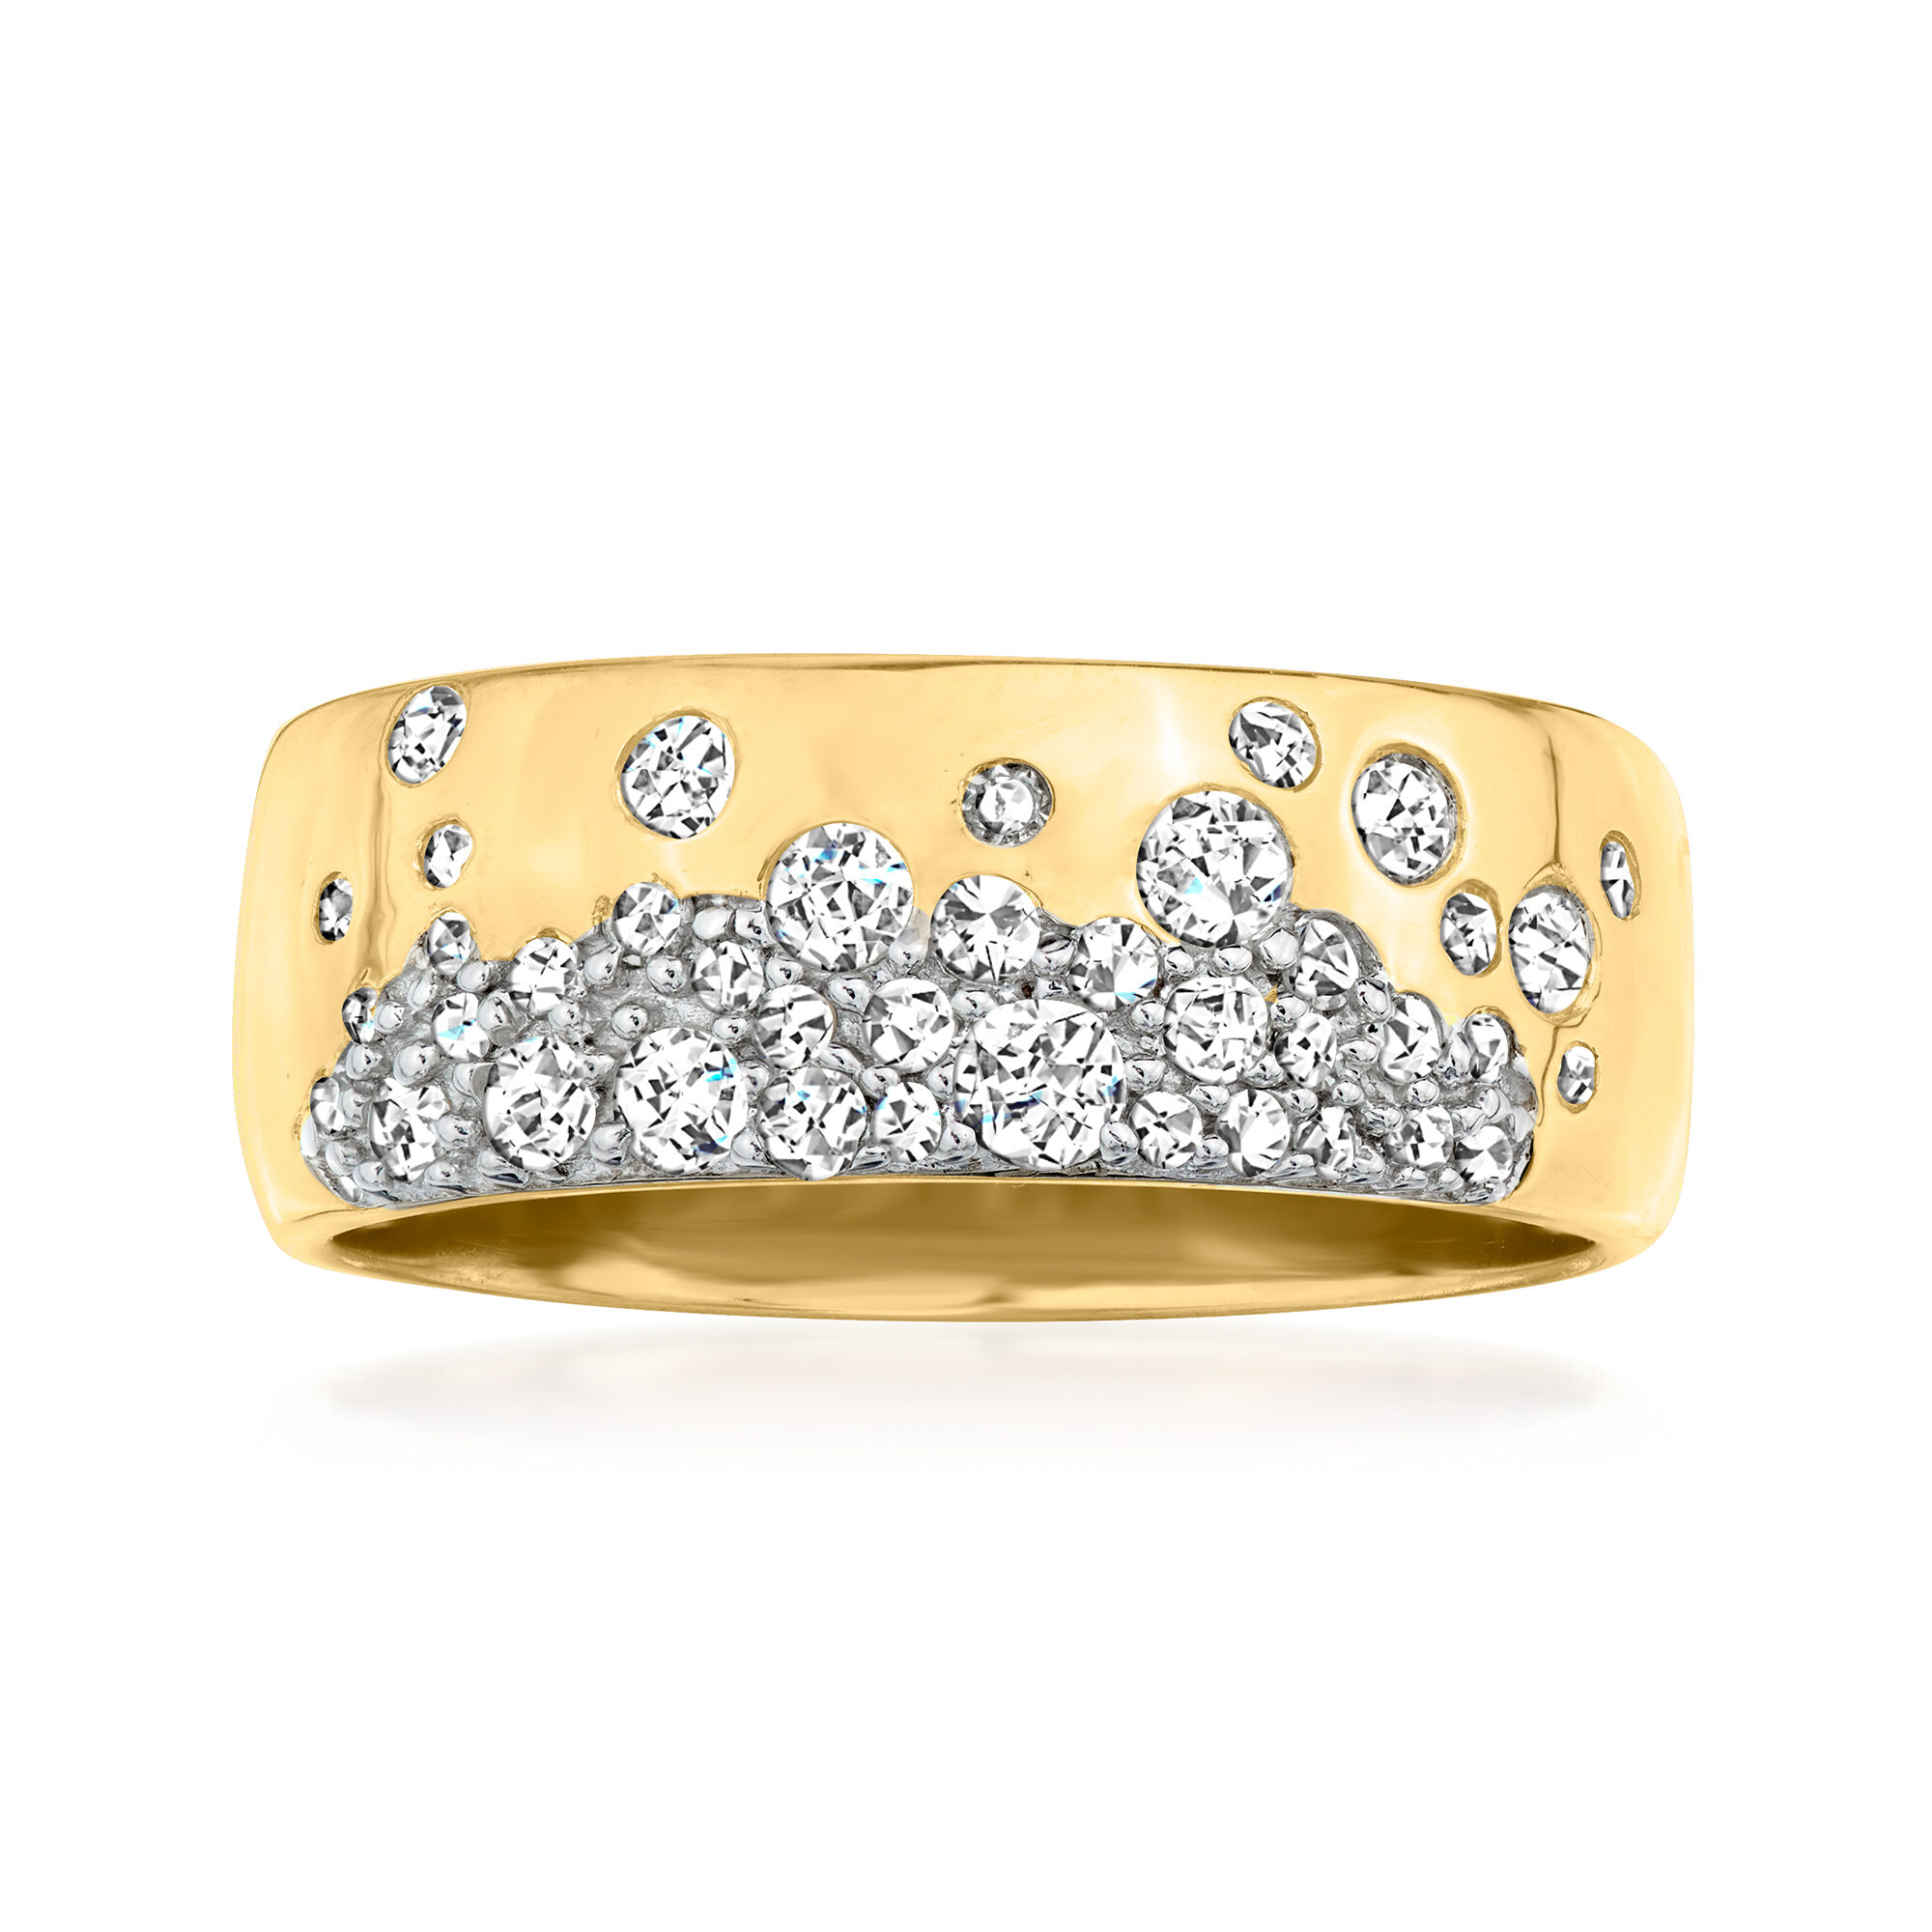 50 ct. t.w. Scattered-Diamond Ring in 18kt Gold Over Sterling